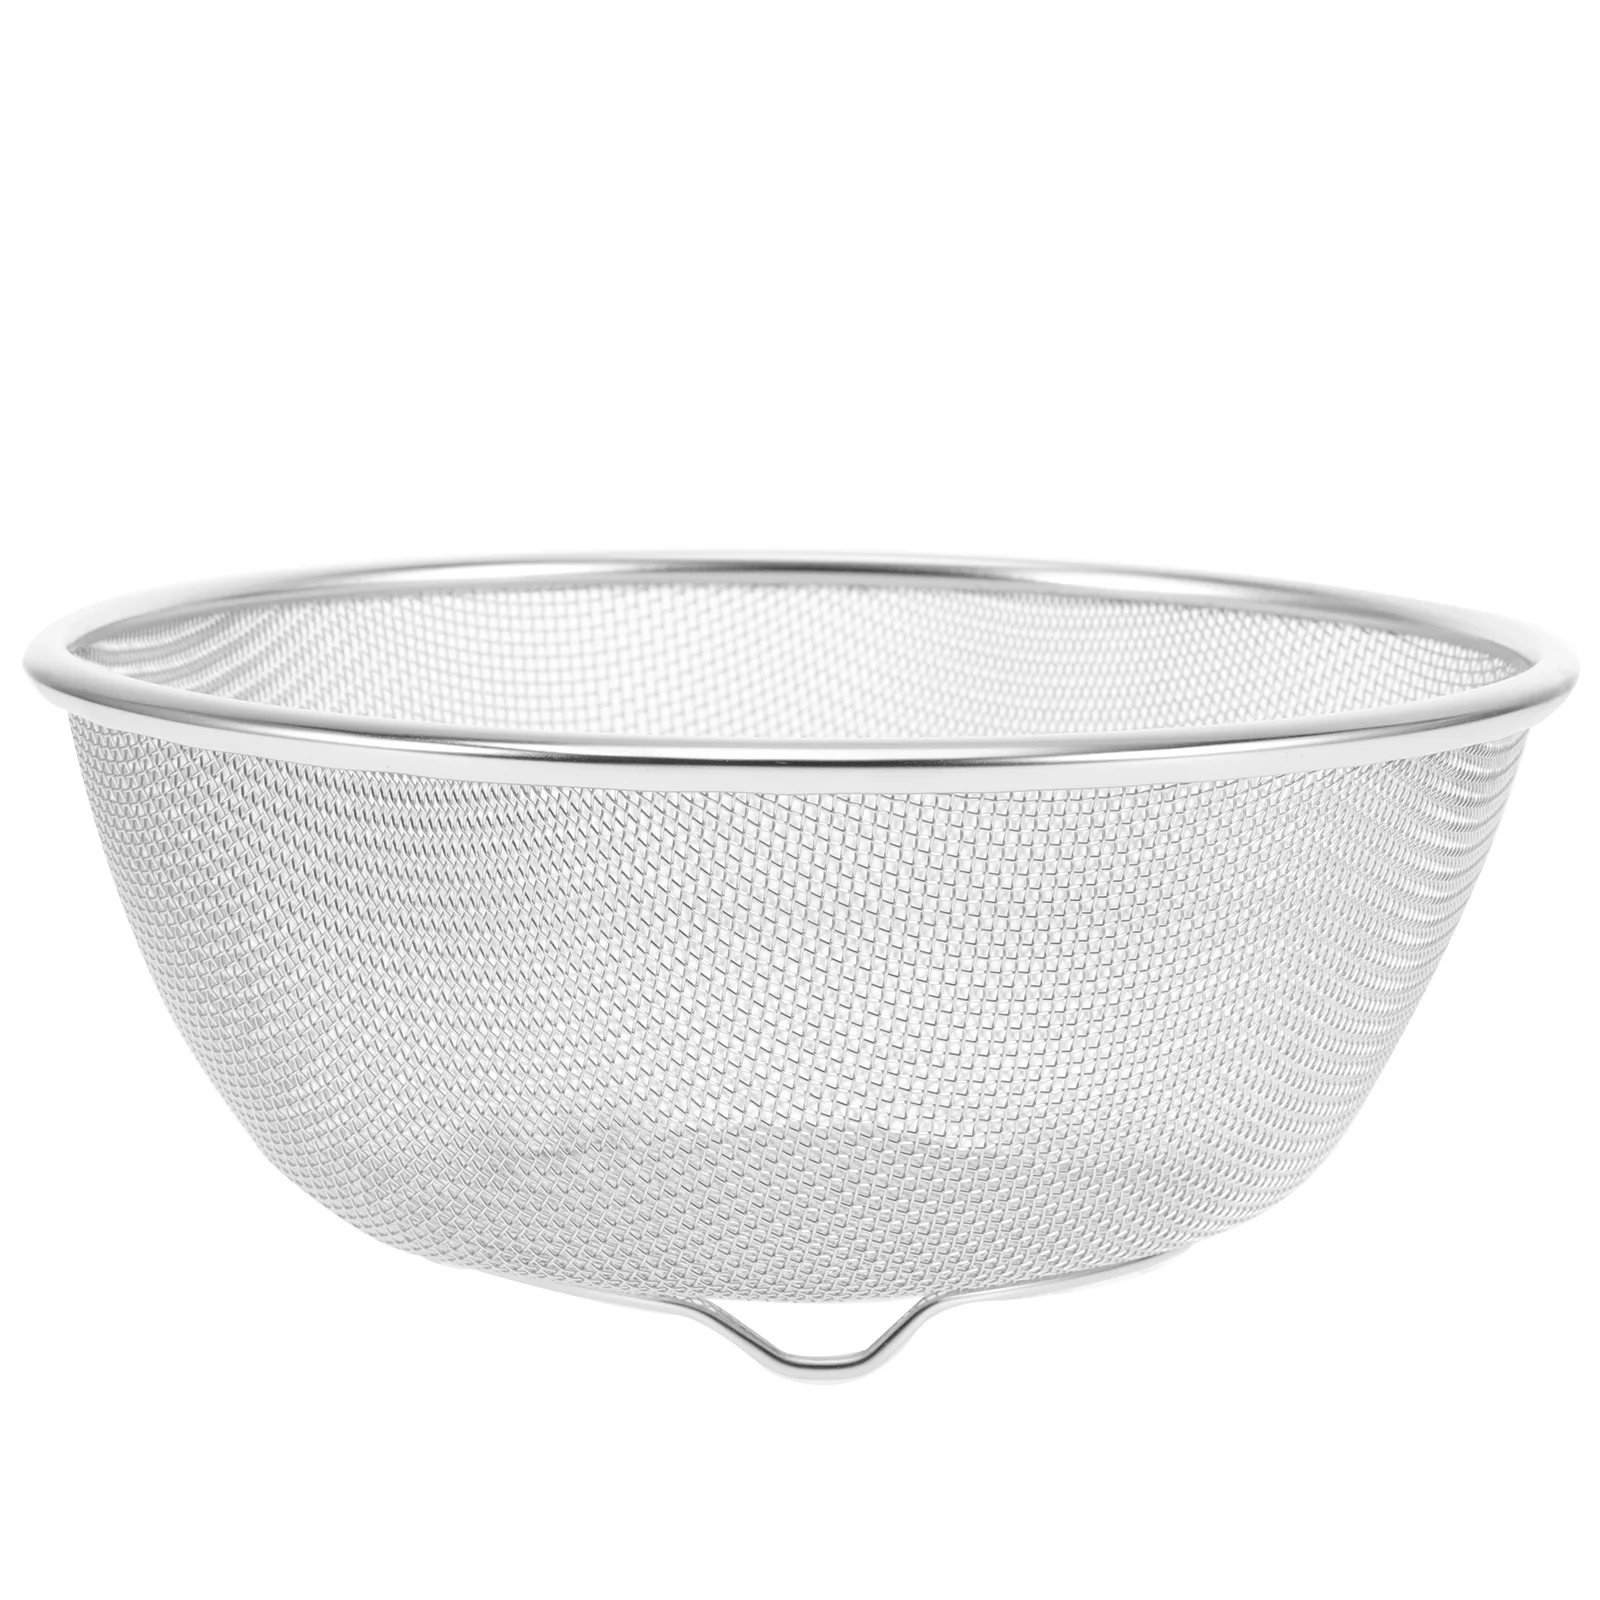 

Rice Washing Bowl Cleaner Strainer Strainers Fine Mesh Small Stainless Steel Colander Drainer